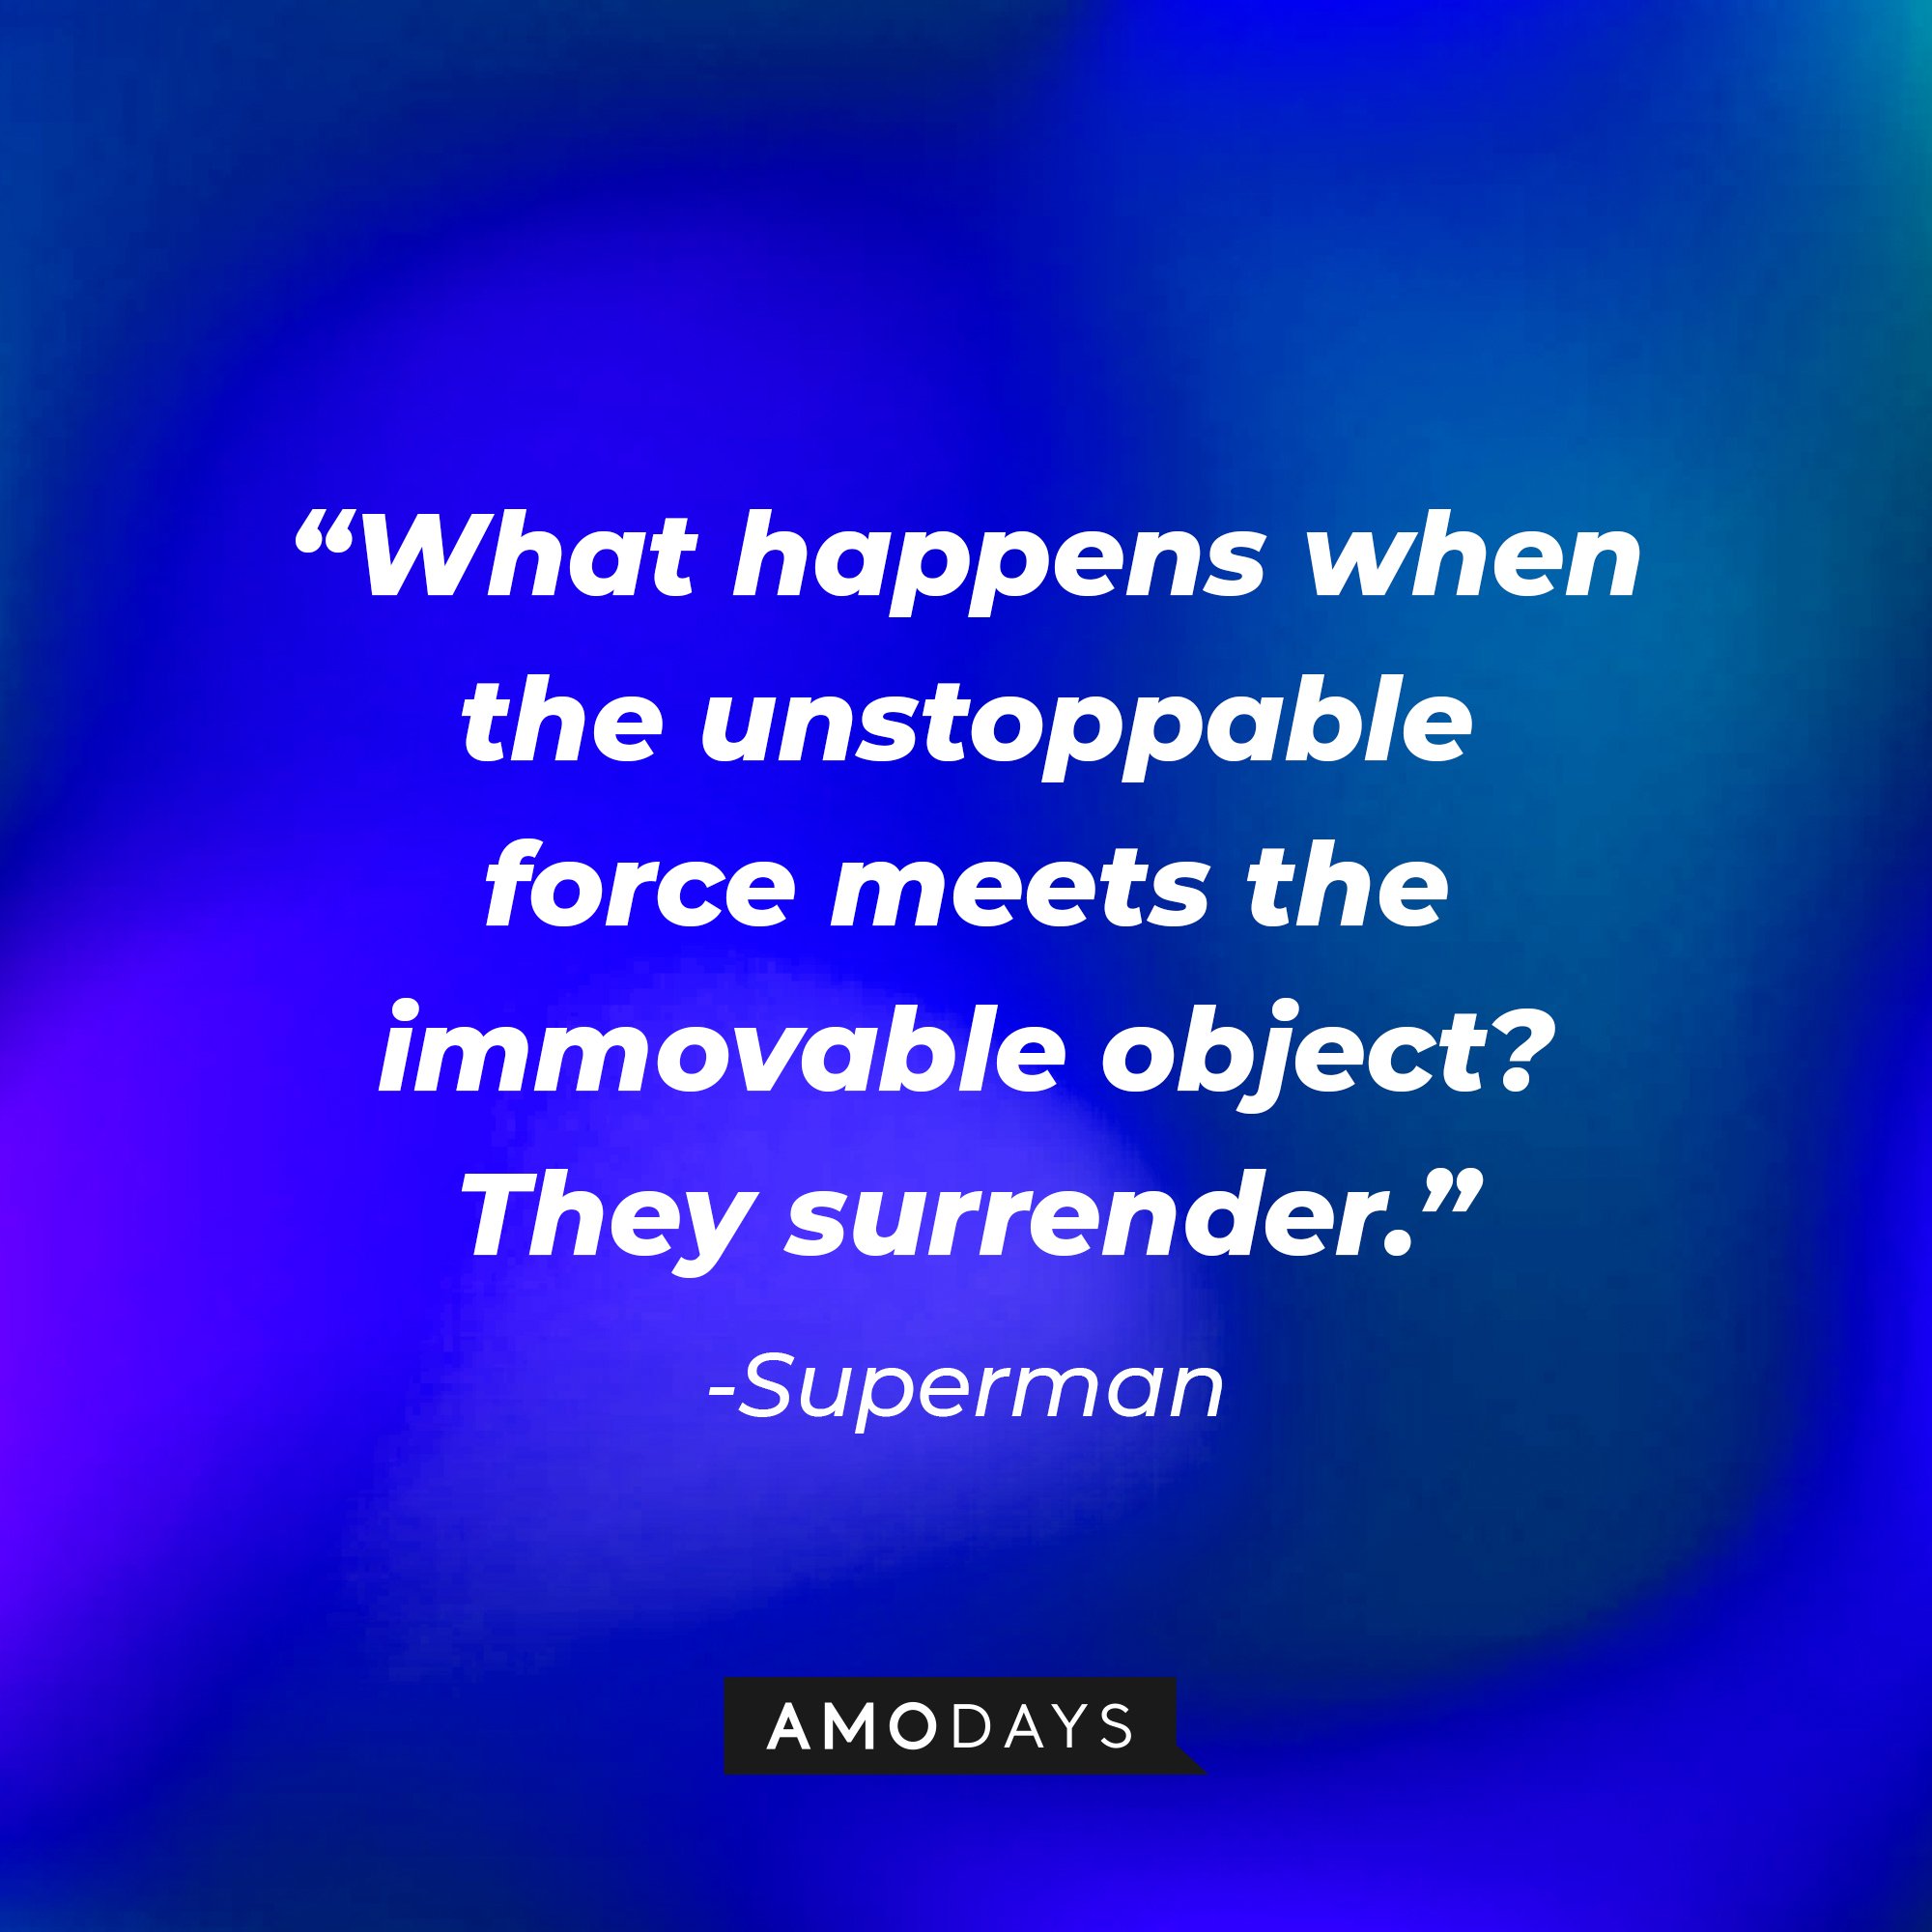 Superman's quote: "What happens when the unstoppable force meets the immovable object? They surrender.” | Image: AmoDays